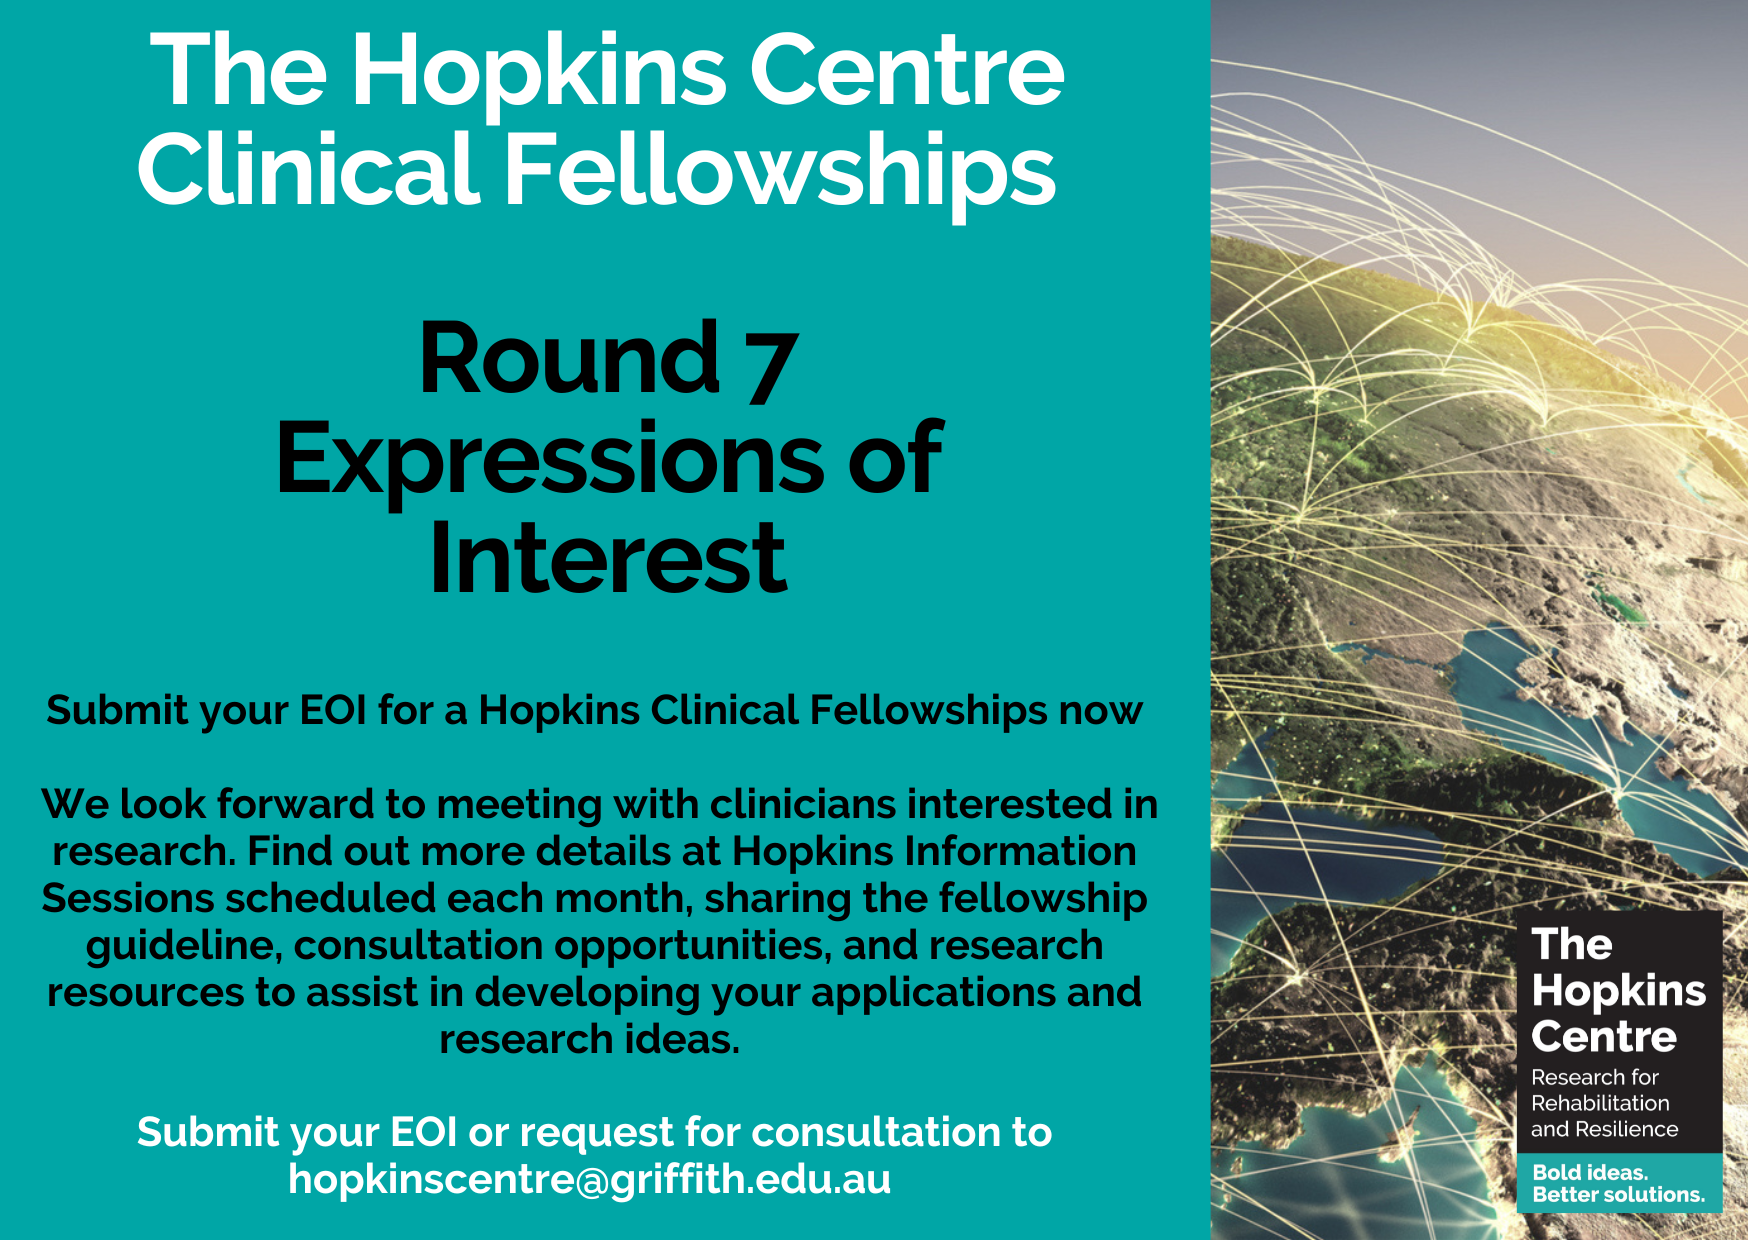 A flyer divided vertically into 2 sections: the left 3/4 is a turquoise background; the right 1-4 shows an image of the earth with golden lines arcing between continents. On top of the turquoise background is a bolded white title "The Hopkins Centre Clinical Fellowships" at the top and "Coming Soon!" in the middle. In between the white text is black text reading "Round 7 Expressions of interest" and the text "coming soon!" underneath in white. At the bottom, there is smaller black text with some more information about the EOIs opening in late August. 